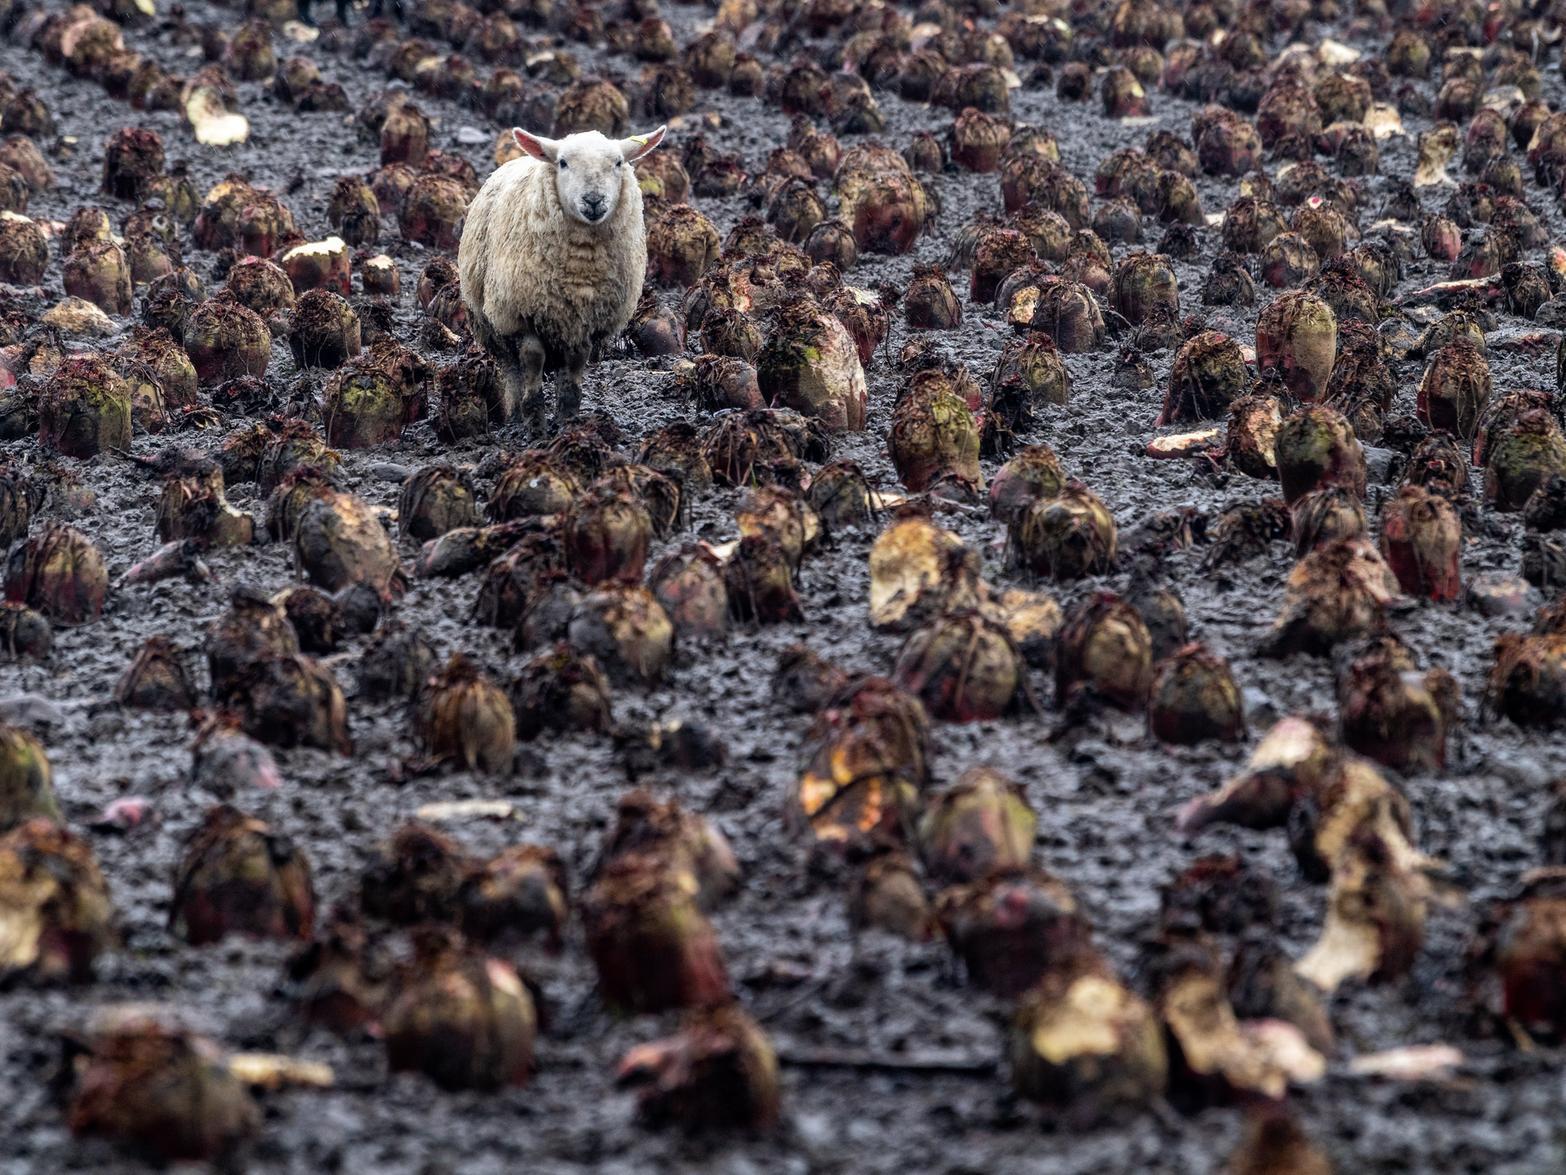 A flock of sheep in a field in Harewood, near Leeds, which is facing terrible conditions for livestock currently